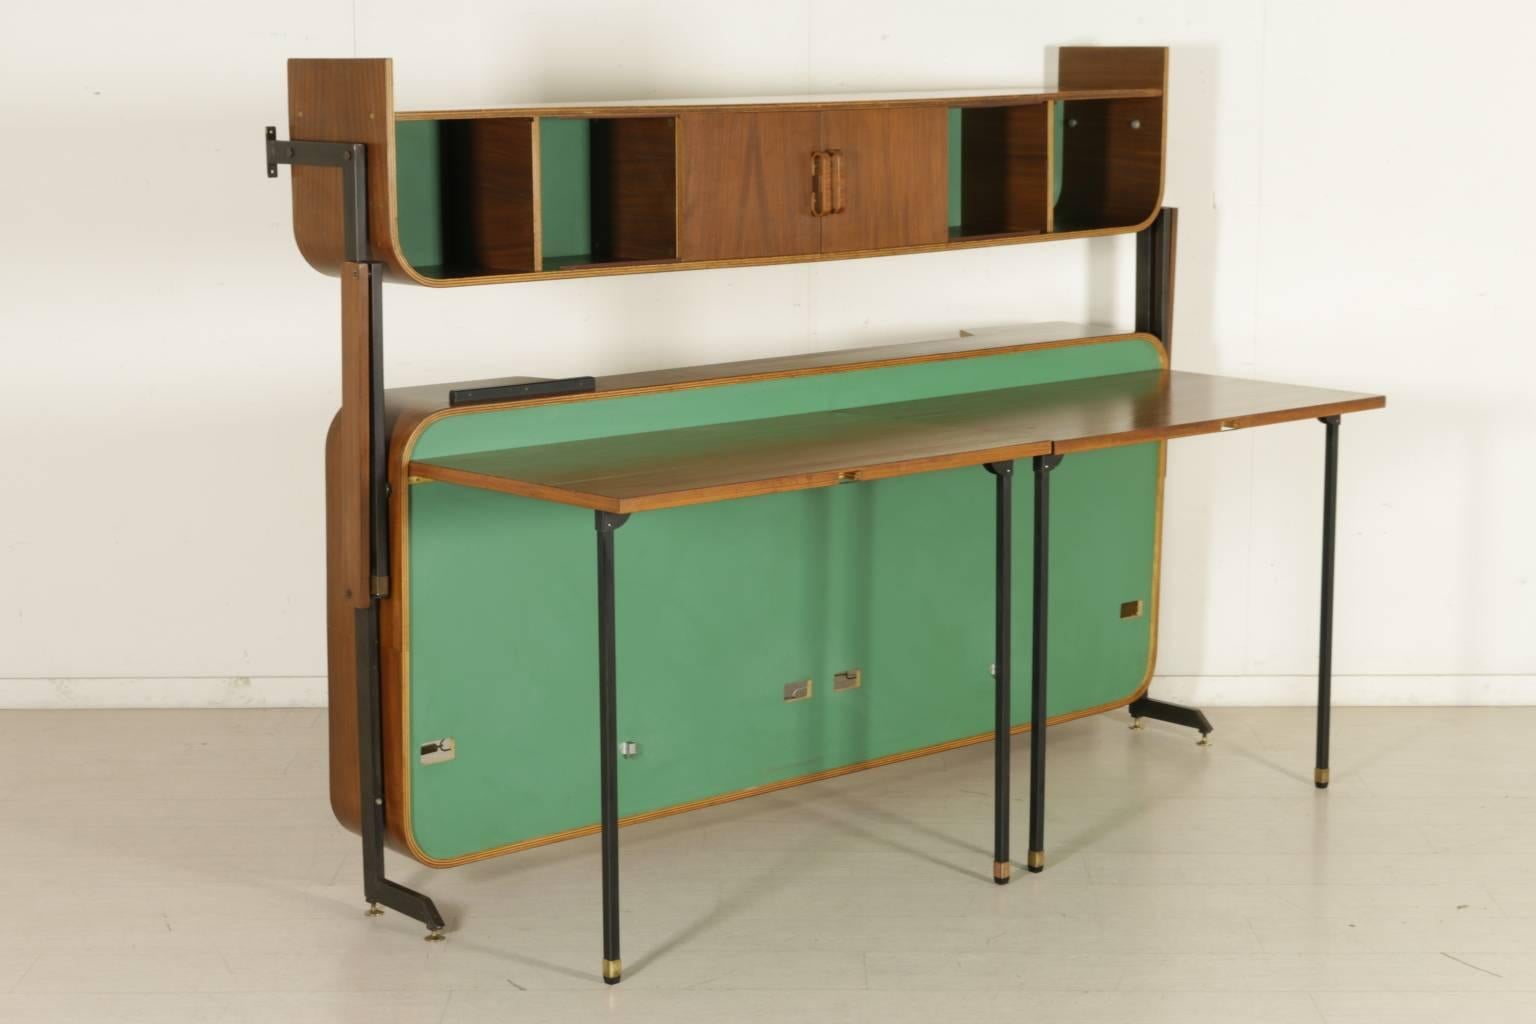 A bed-cabinet attributed to Franco Campo, convertible into a study with two desks. Mahogany veneered bent plywood with lacquered details, varnished metal, brass. Manufactured in Italy, 1950s.